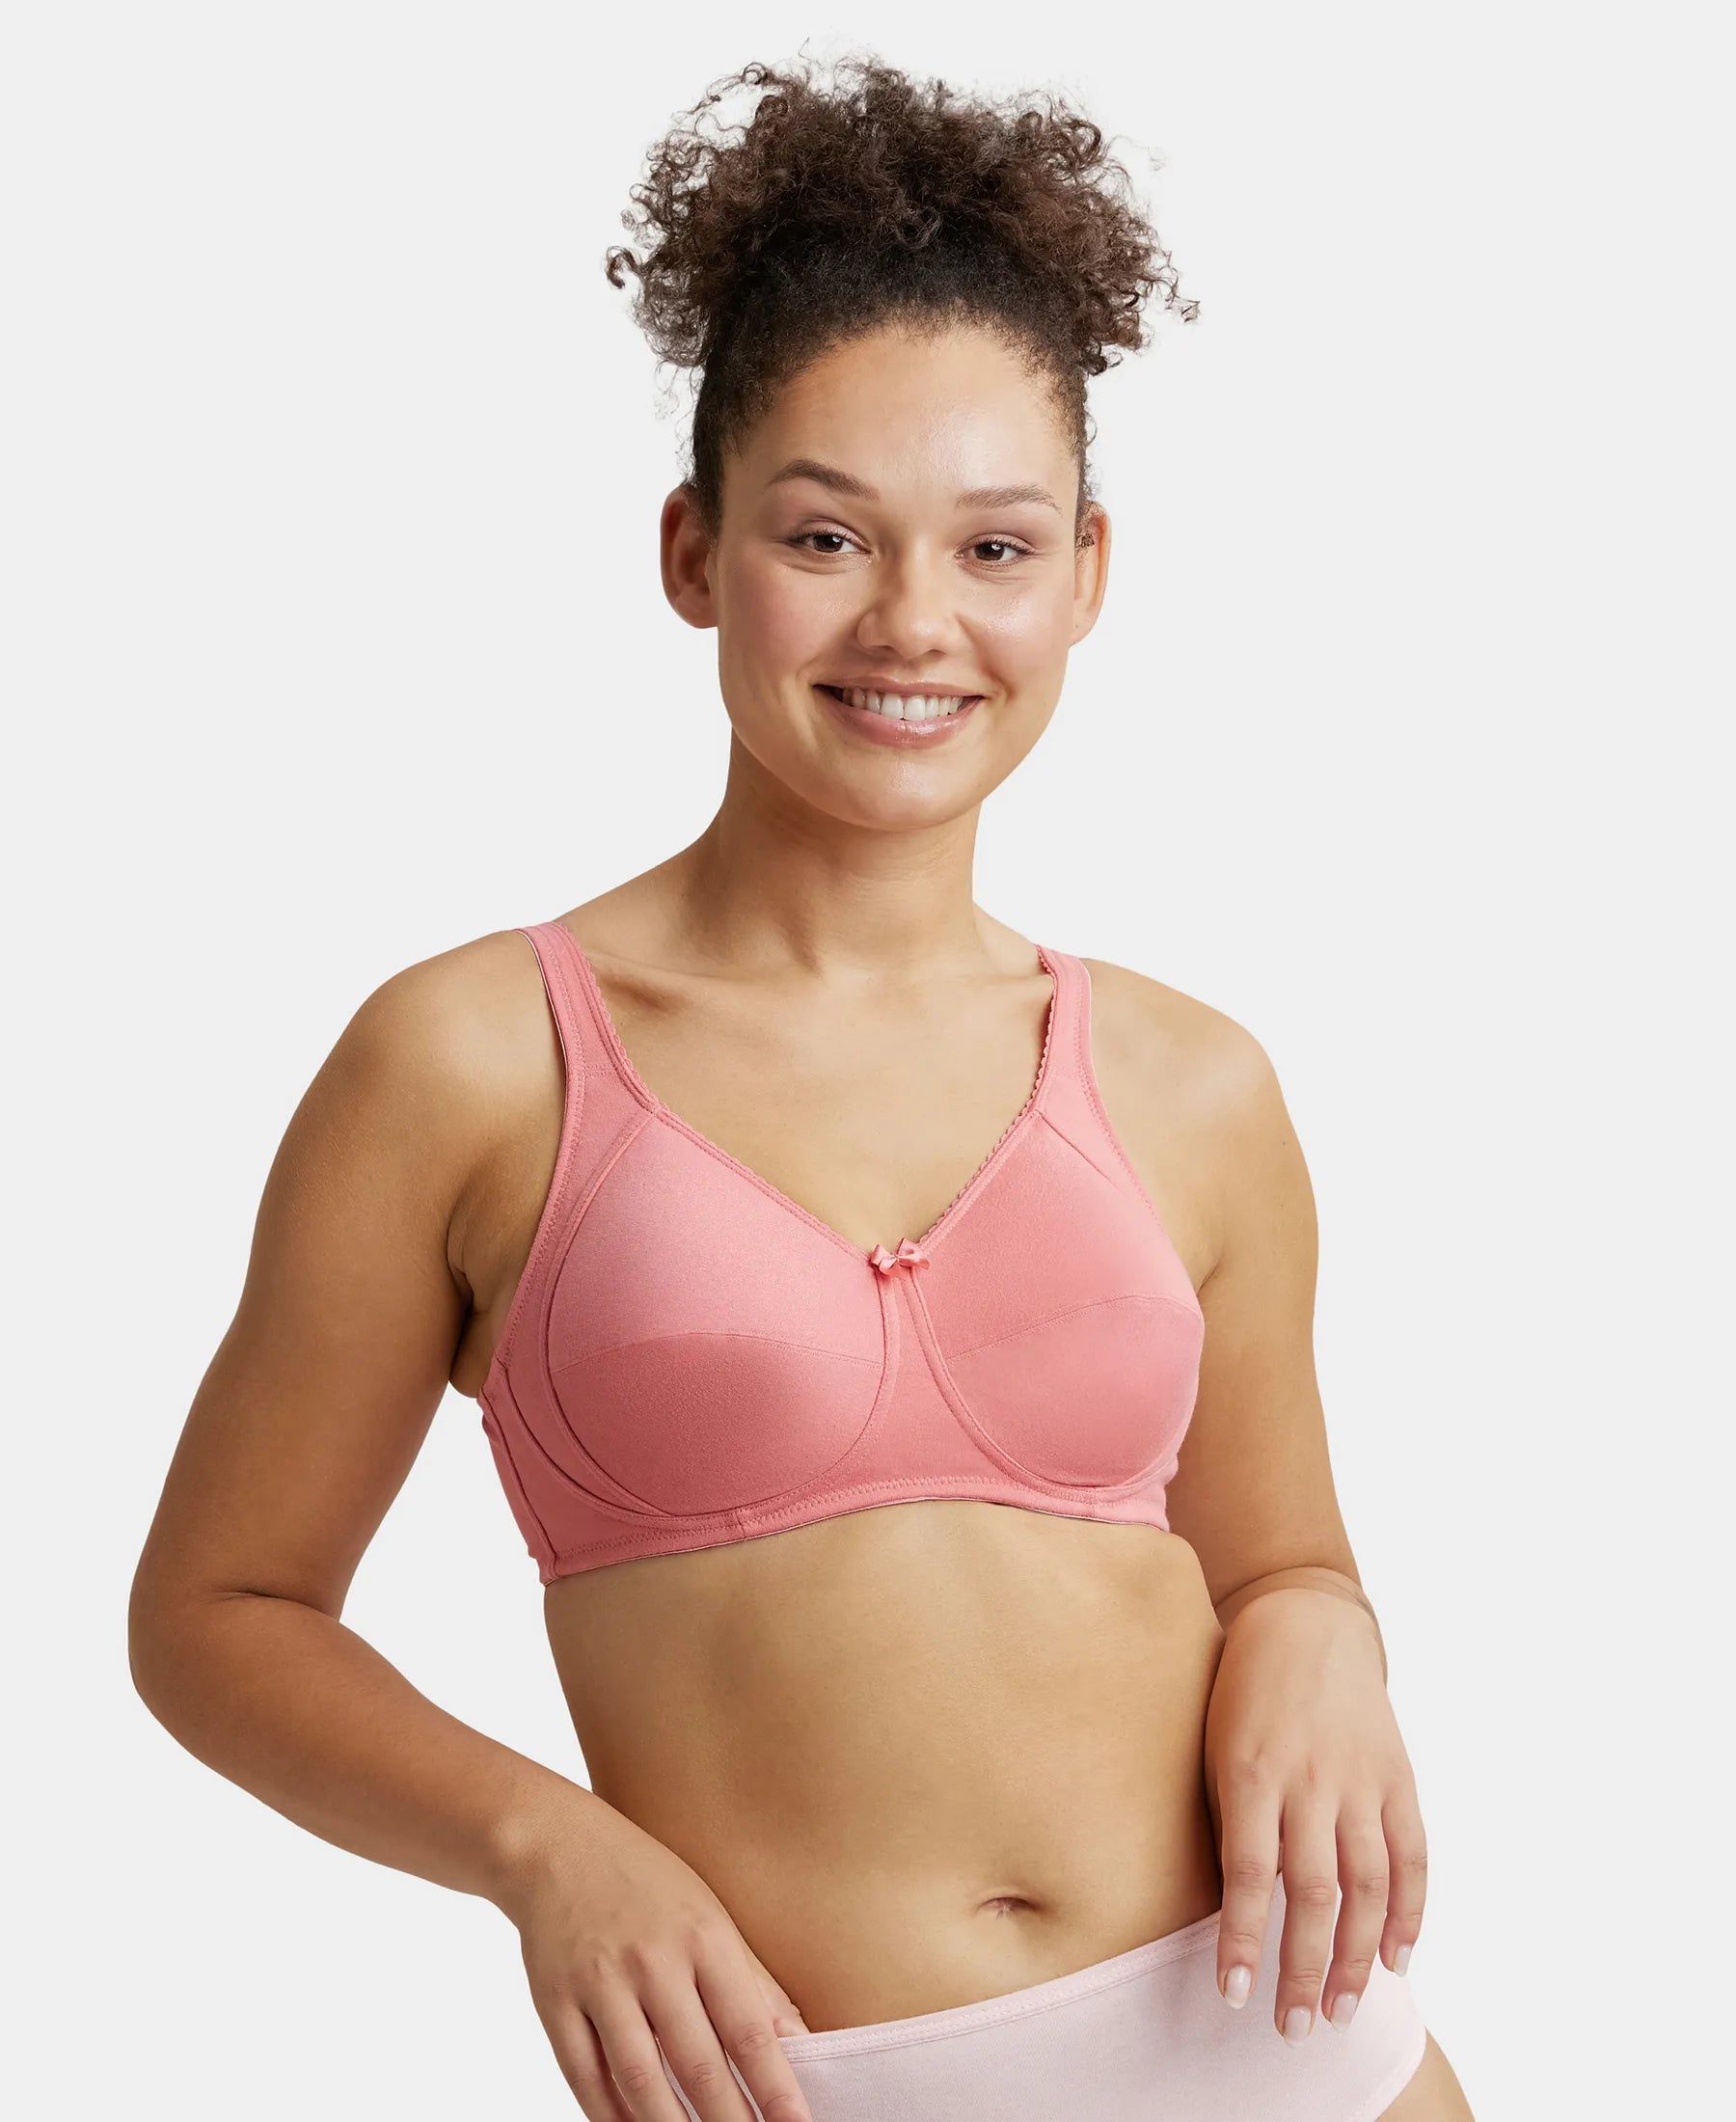 Buy BF BODY FIGURE Women Full Coverage Non Padded Bra (Multicolor) - Full  Support Regular Cotton Bra for Women & Girl, Non-Wired, Wirefree,  Adjustable Straps, Anti Bacterial (COMB-DOLLR-32B) at